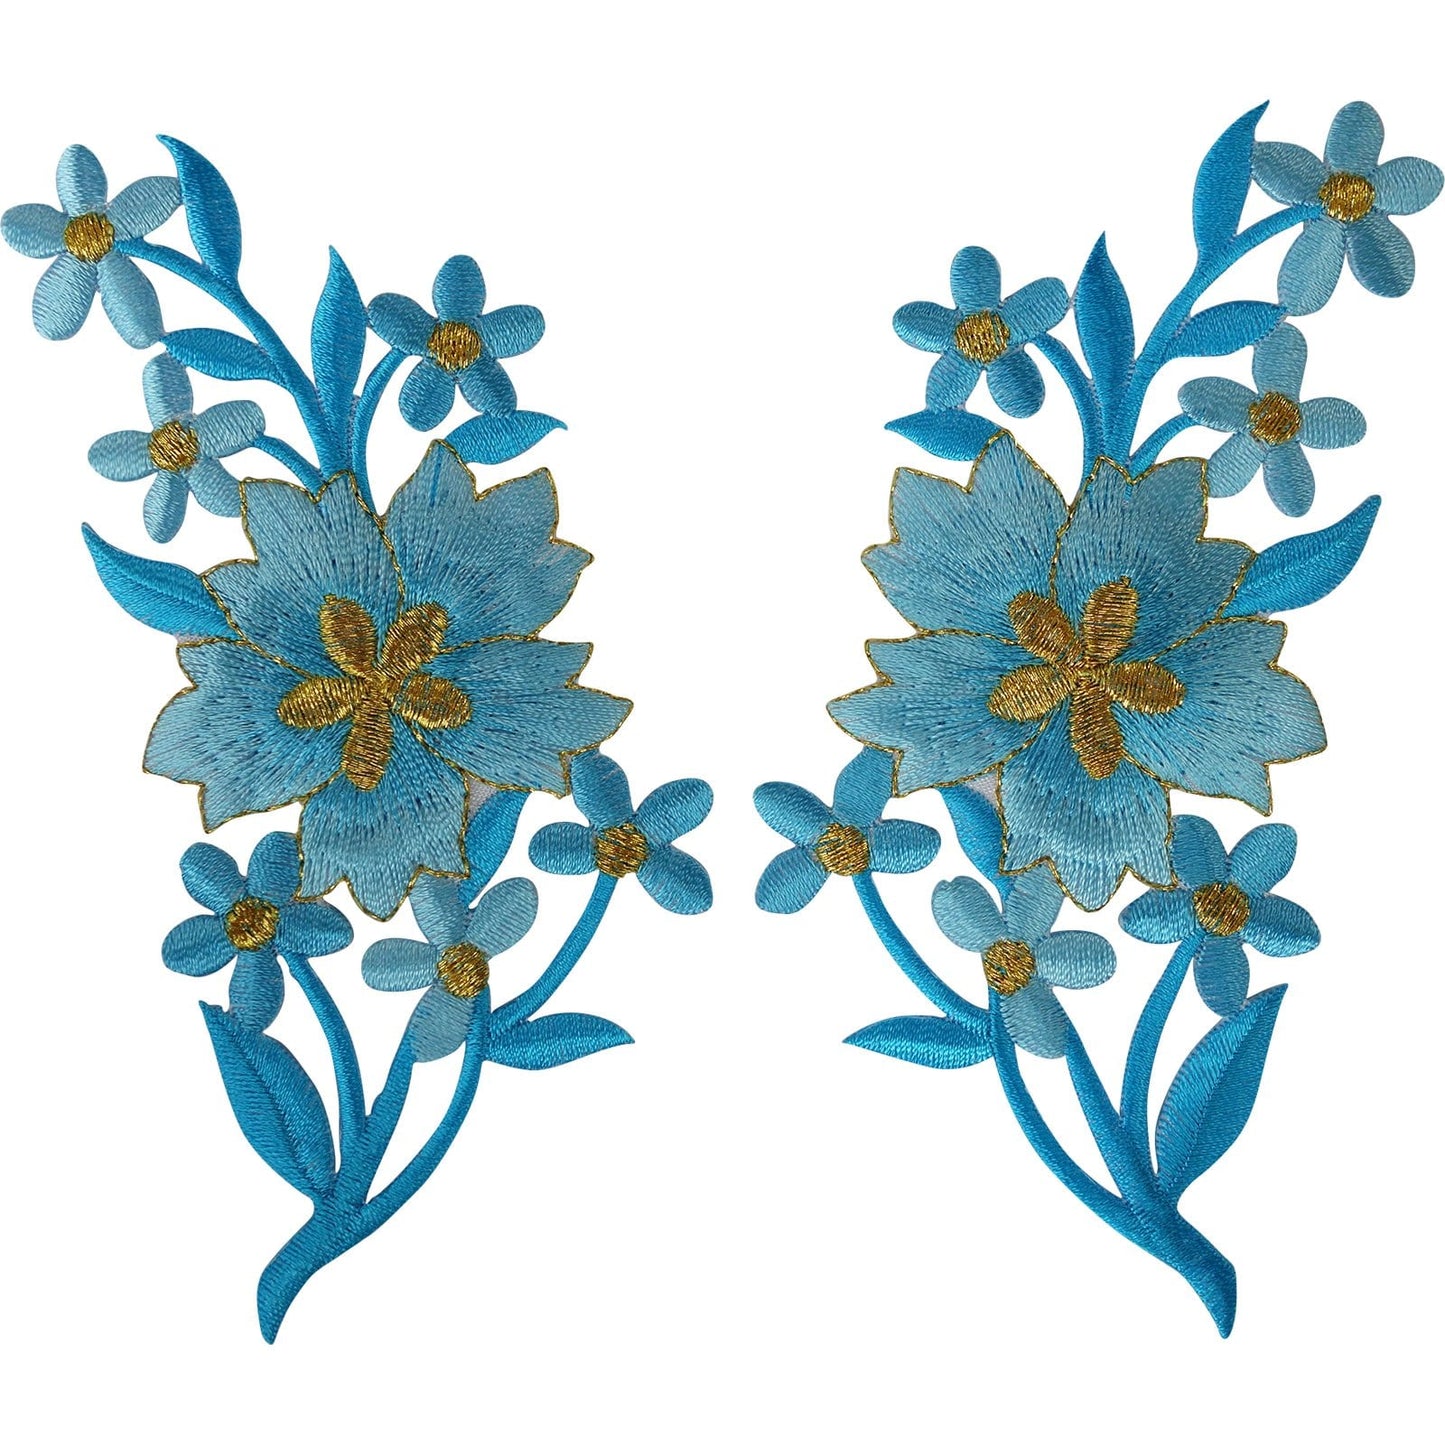 Pair of Flower Patches Iron Sew On Embroidery Patch Badge Motif Applique Flowers